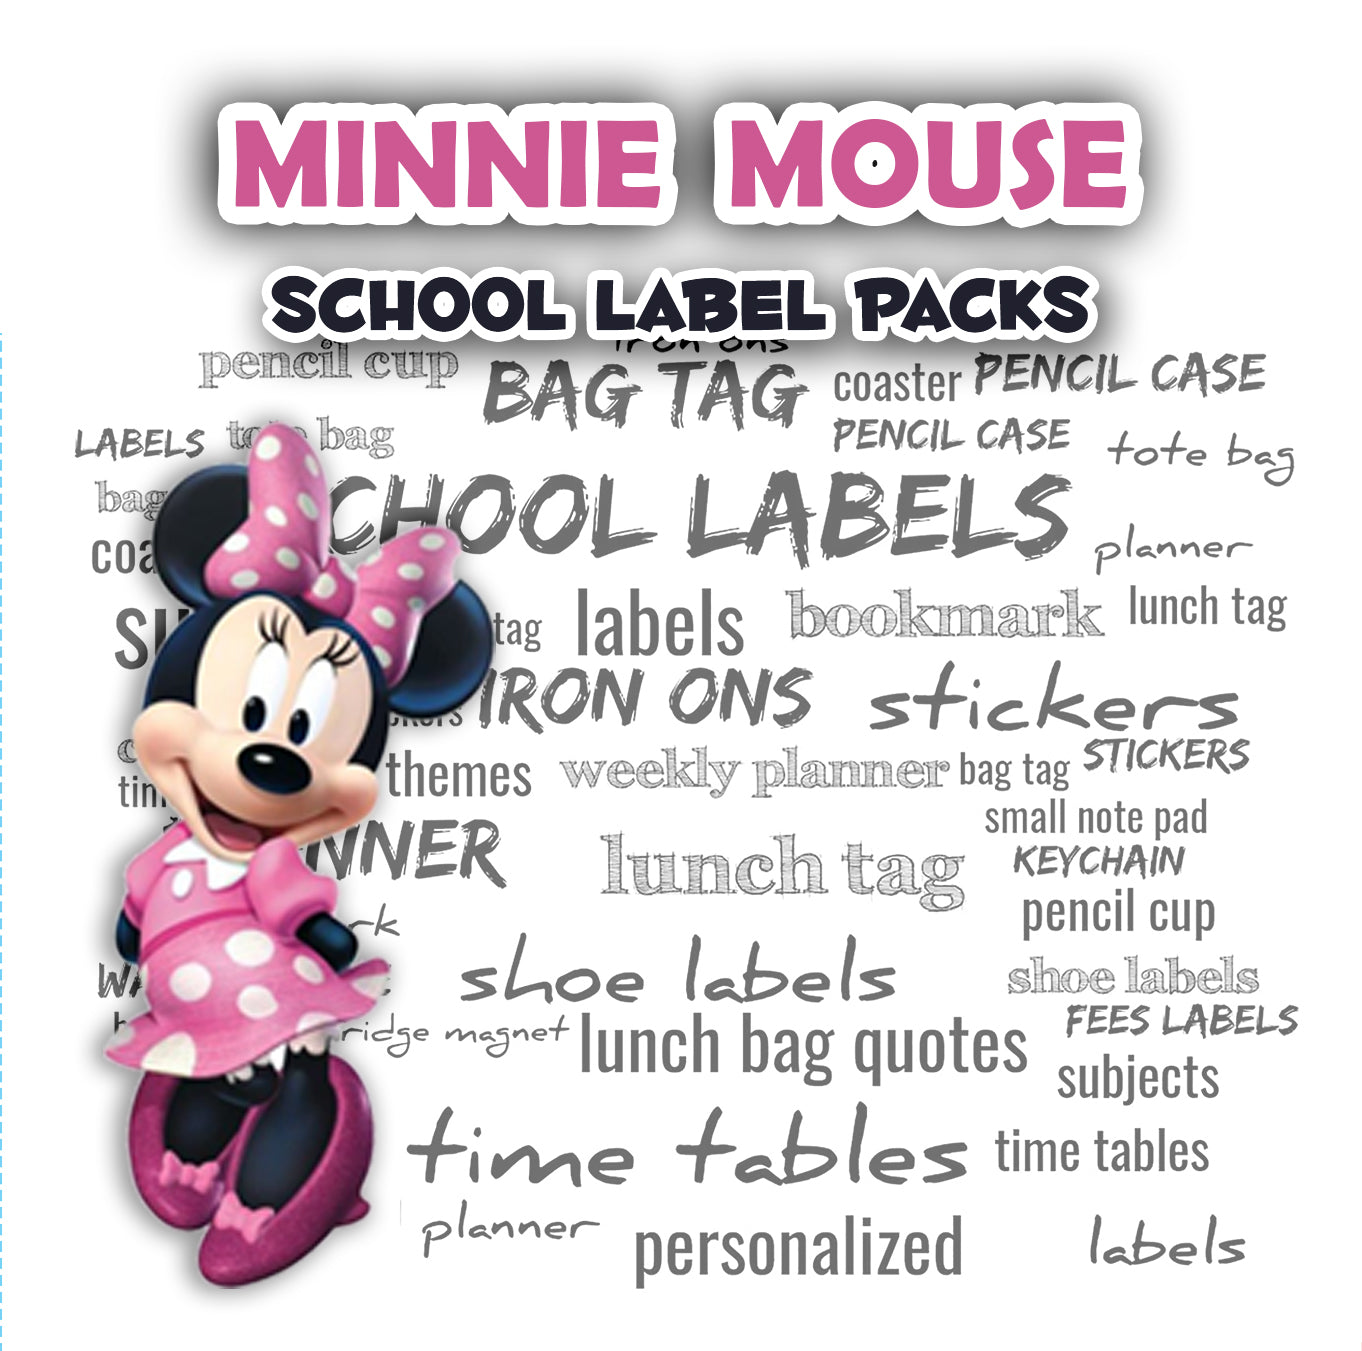 ""Minnie Mouse" School labels packs